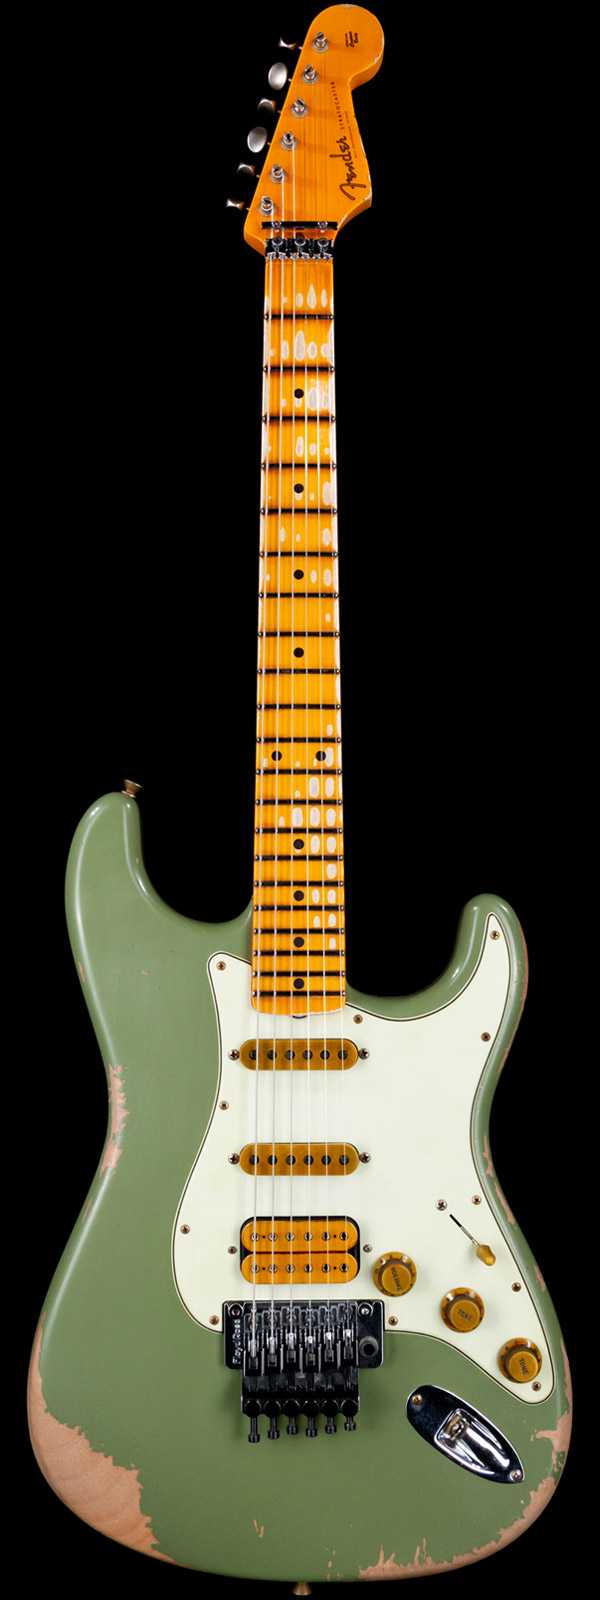 Fender Custom Shop Alley Cat Stratocaster Heavy Relic HSS Floyd Rose Rosewood Board Faded Army Drab Green